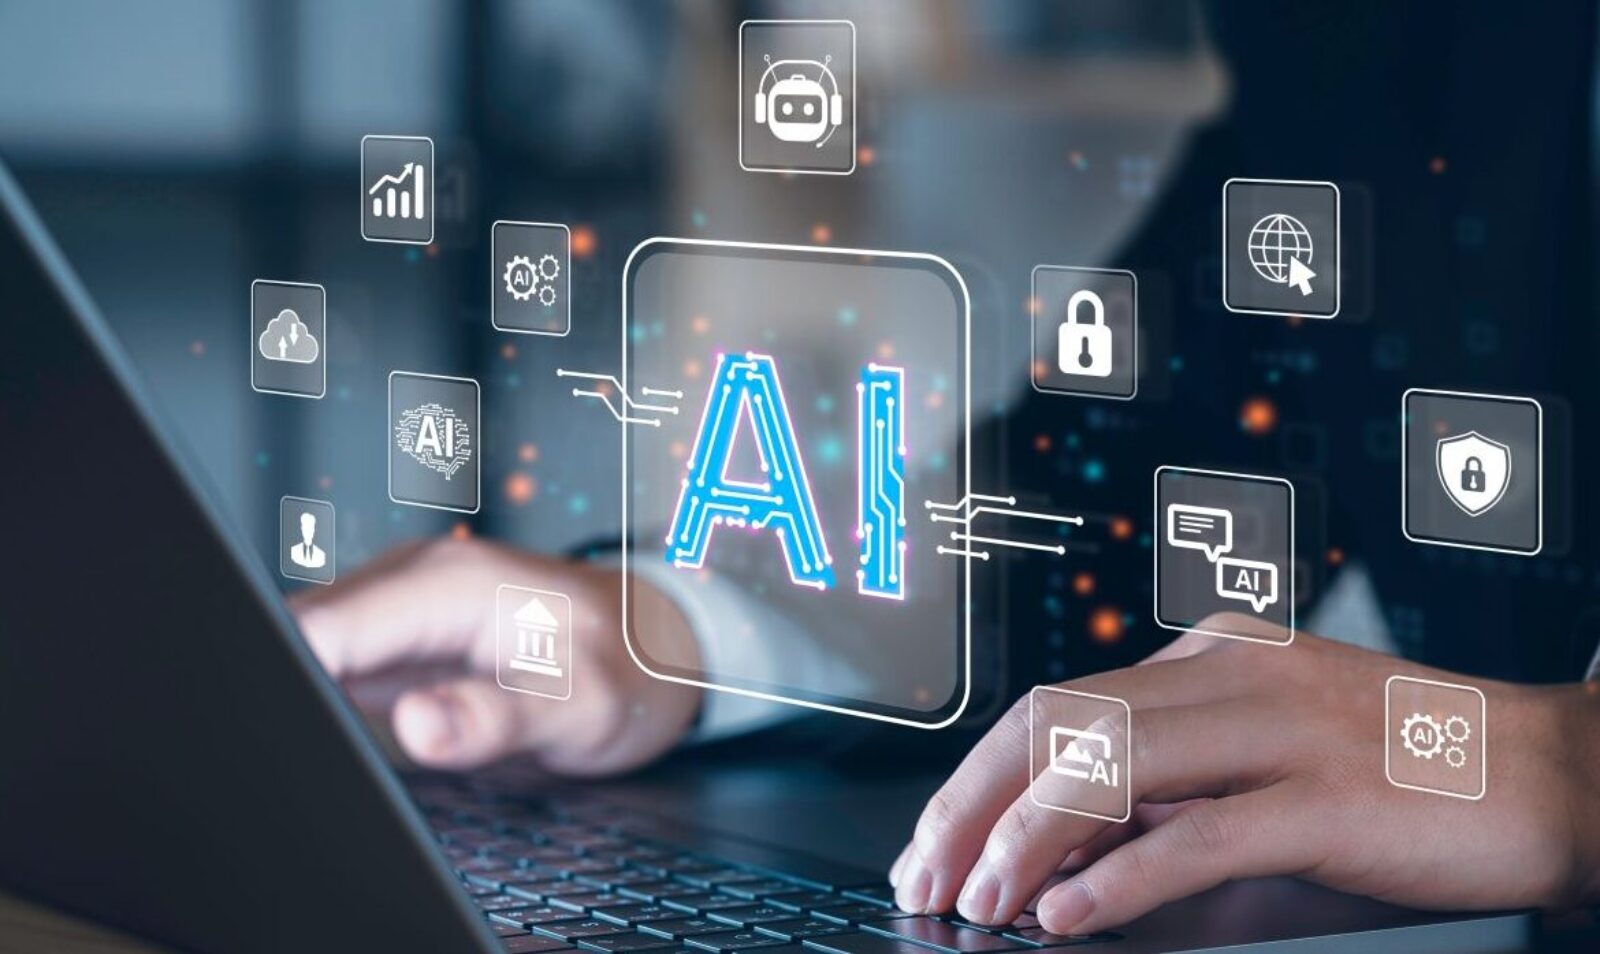 AI, Artificial Intelligence, marketing, digital marketing, AI tools, content, automation, marketers, technology, advertising, infographic, digital transformation, growth, future, predictive analysis, machine learnings, ai algorithms, ai technologies, marketing automation, marketing strategies, AI chatbots